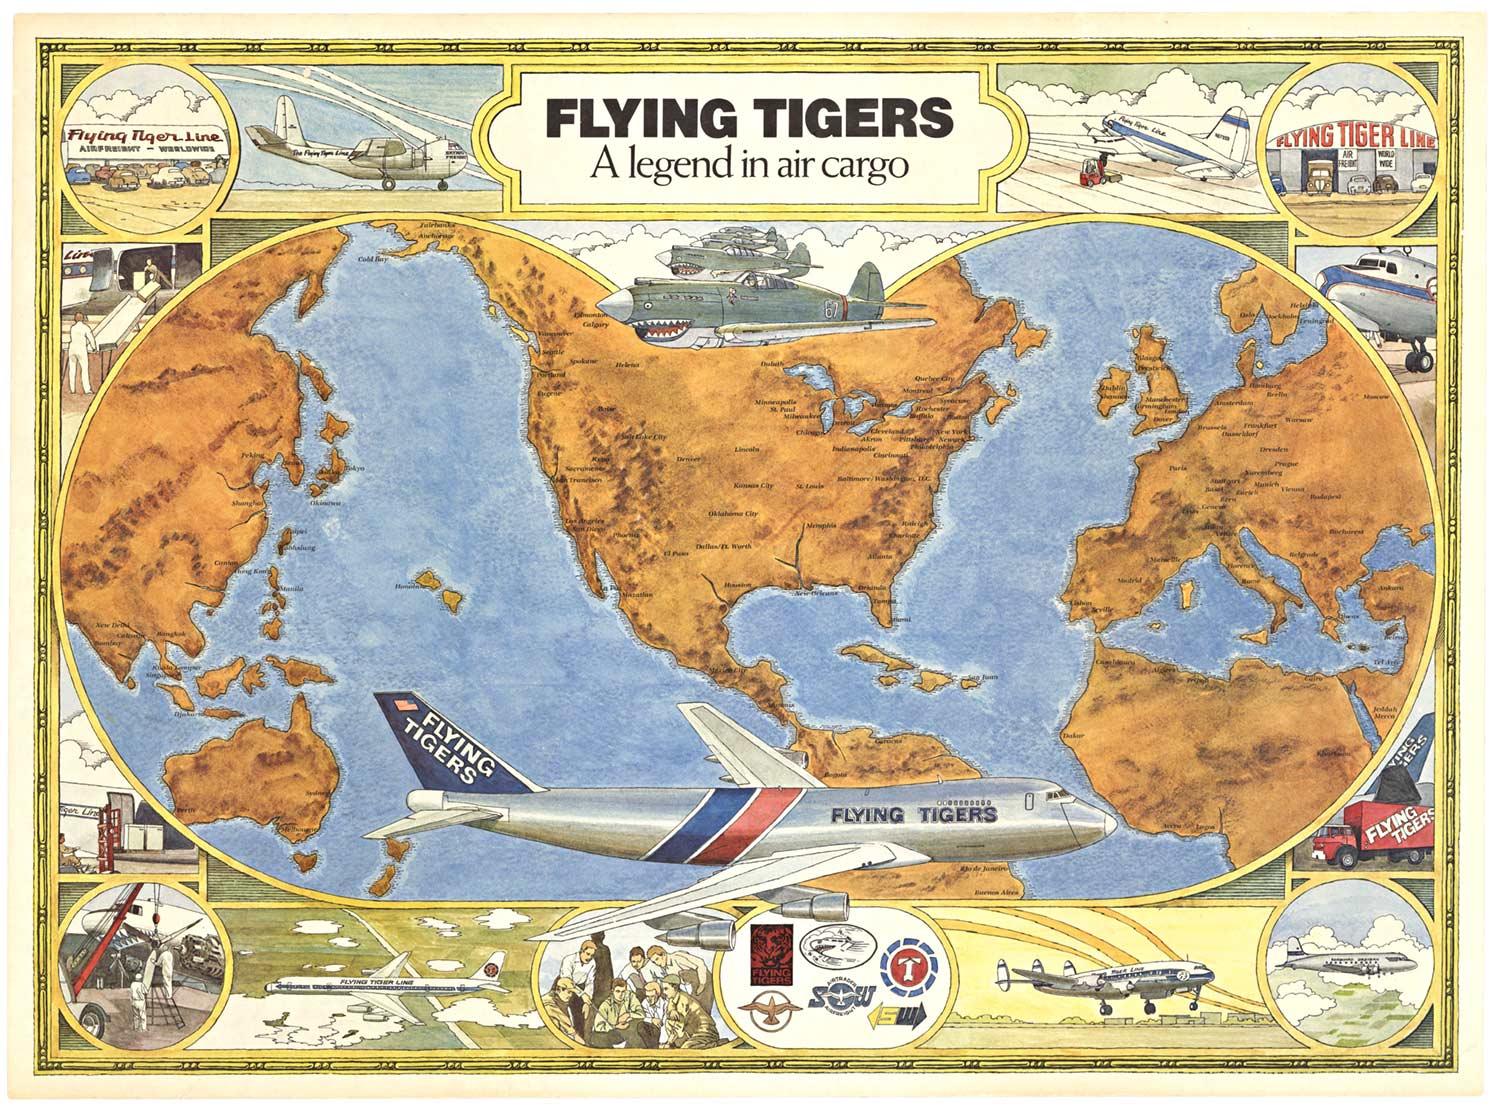 Unknown Print - Original "Flying Tigers" vintage airline poster.   A legend in Air Cargo